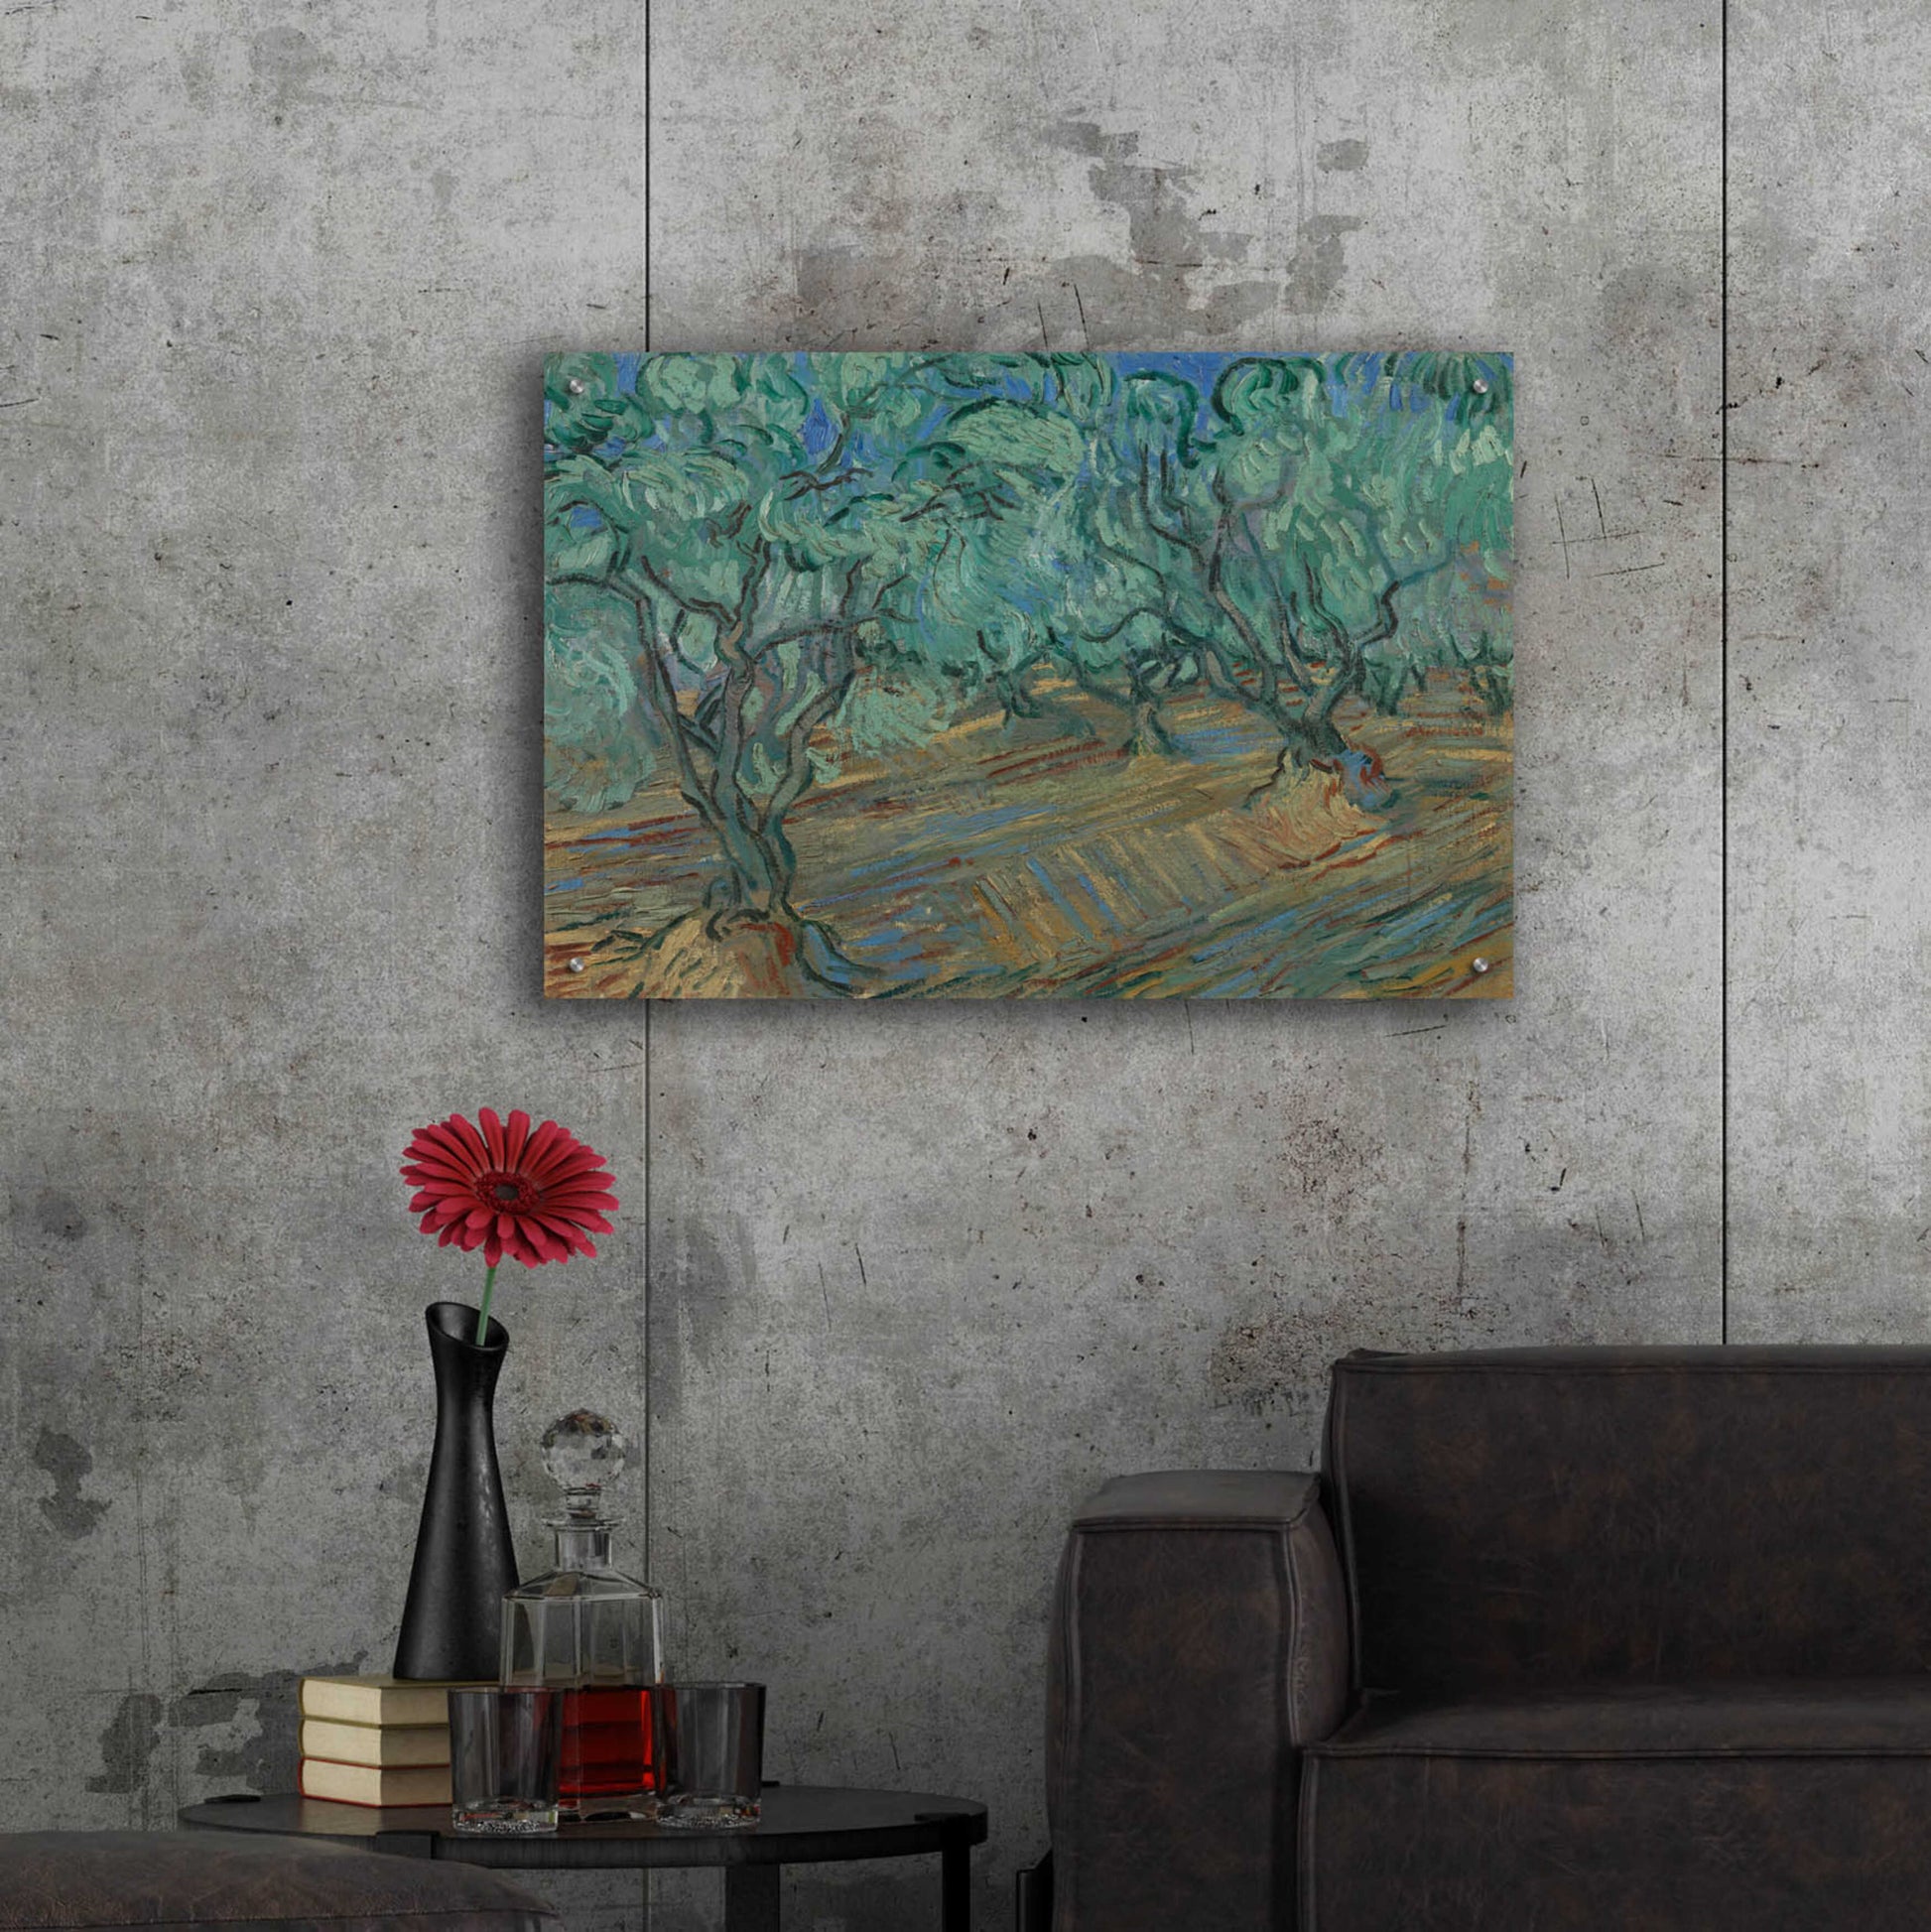 Epic Art 'Olive Grove' by Vincent Van Gogh, Acrylic Glass Wall Art,36x24